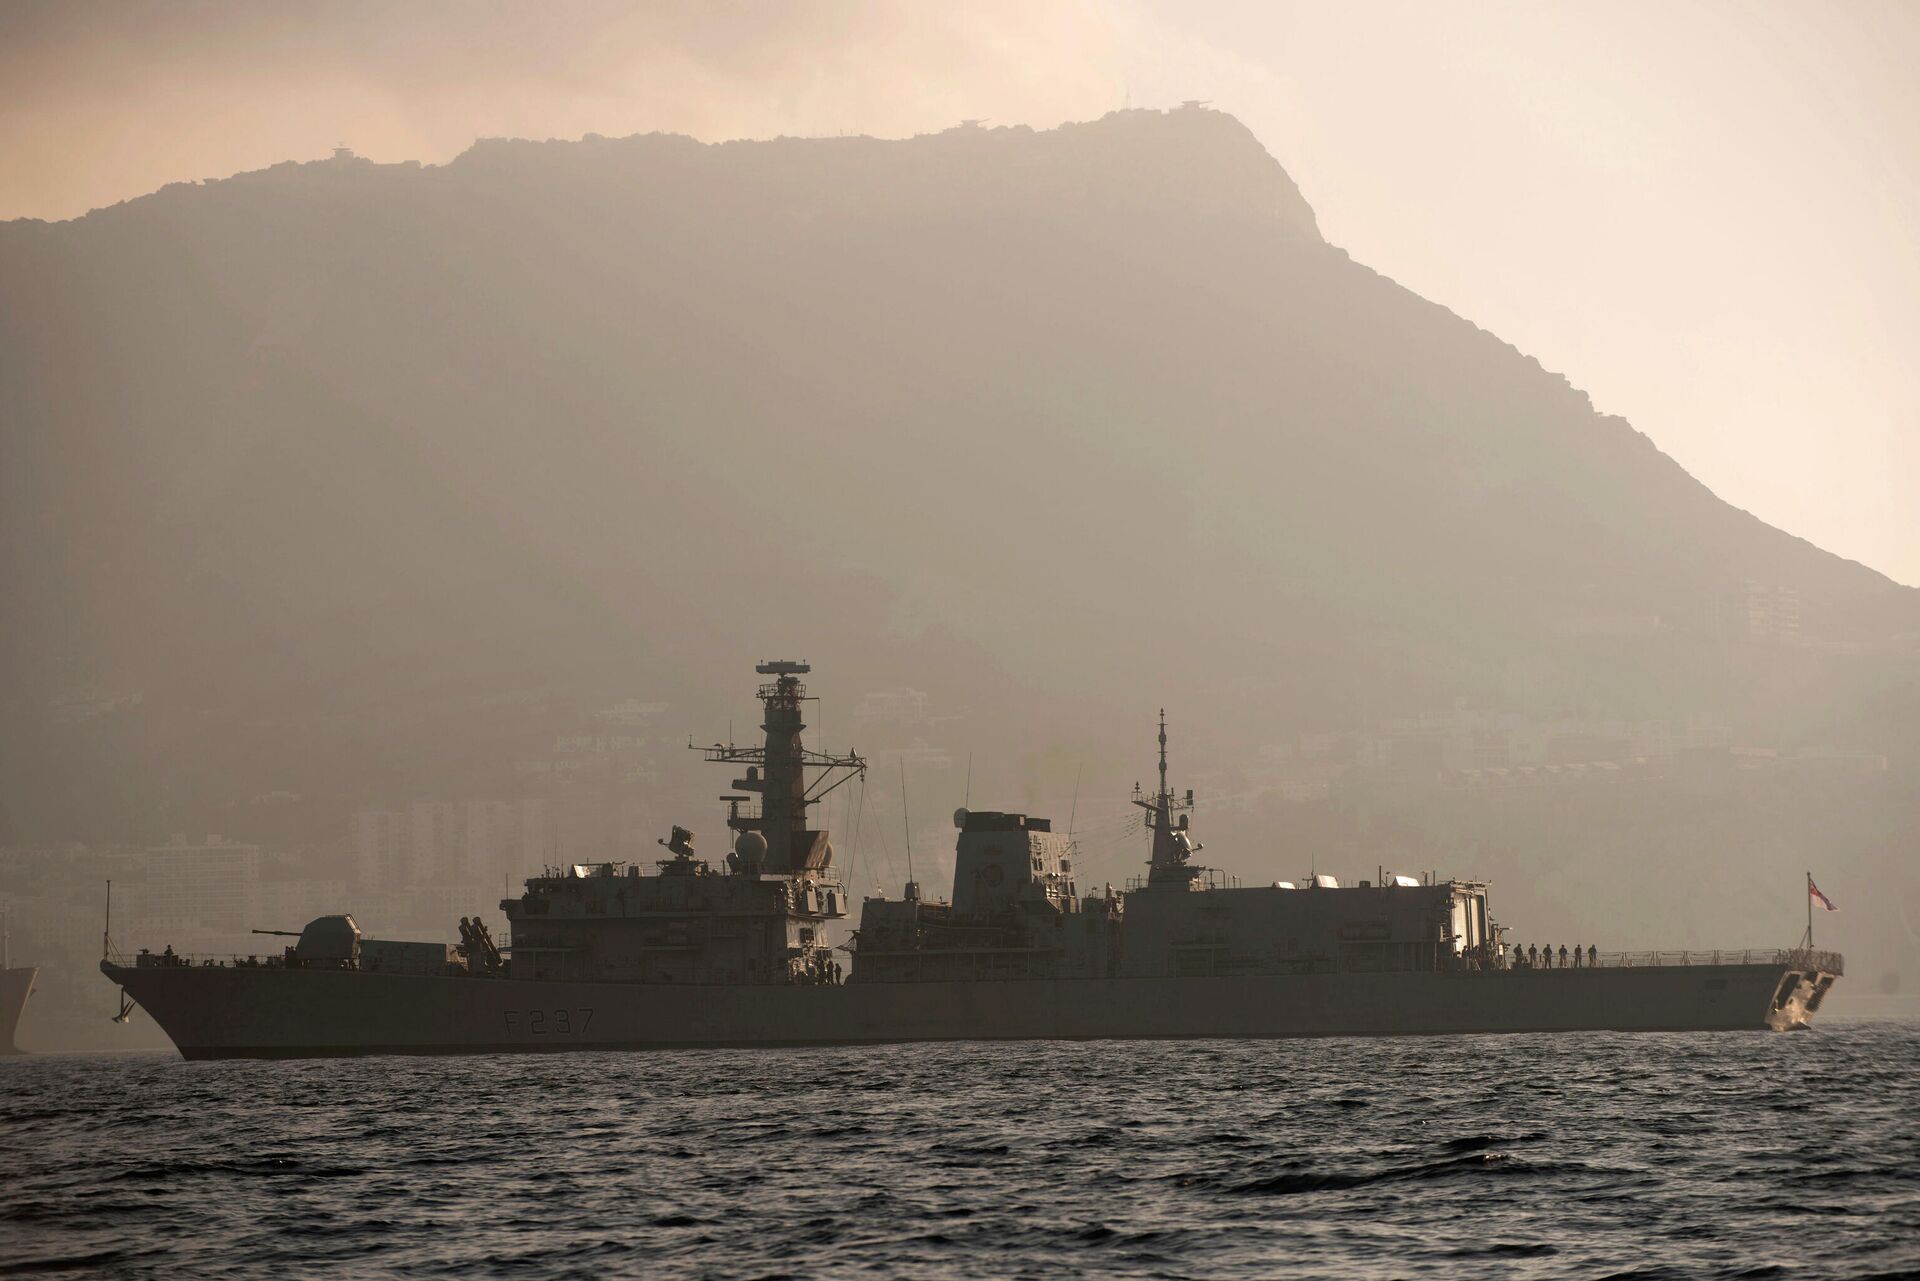 With the rock of Gibraltar in the background, Britain's Royal Navy ship HMS Westminster sails along the Gibraltar stretch near to La Linea de la Concepcion, Spain, Monday, Aug. 19, 2013. The British government said it is considering taking Spain to court if it does not ease border checks on traffic entering the disputed enclave of Gibraltar. Spain has long laid claim to Gibraltar, and the tiny territory on the southern tip of the Iberian peninsula is the source of occasional diplomatic friction between Madrid and London. The latest spat involved an artificial reef being built in Gibraltar that Spain said is hurting its fishermen. It also floated the idea of charging people entering and leaving Gibraltar 50 euros ($66) to provide compensation for the losses that the fishermen face.  - Sputnik International, 1920, 26.12.2021